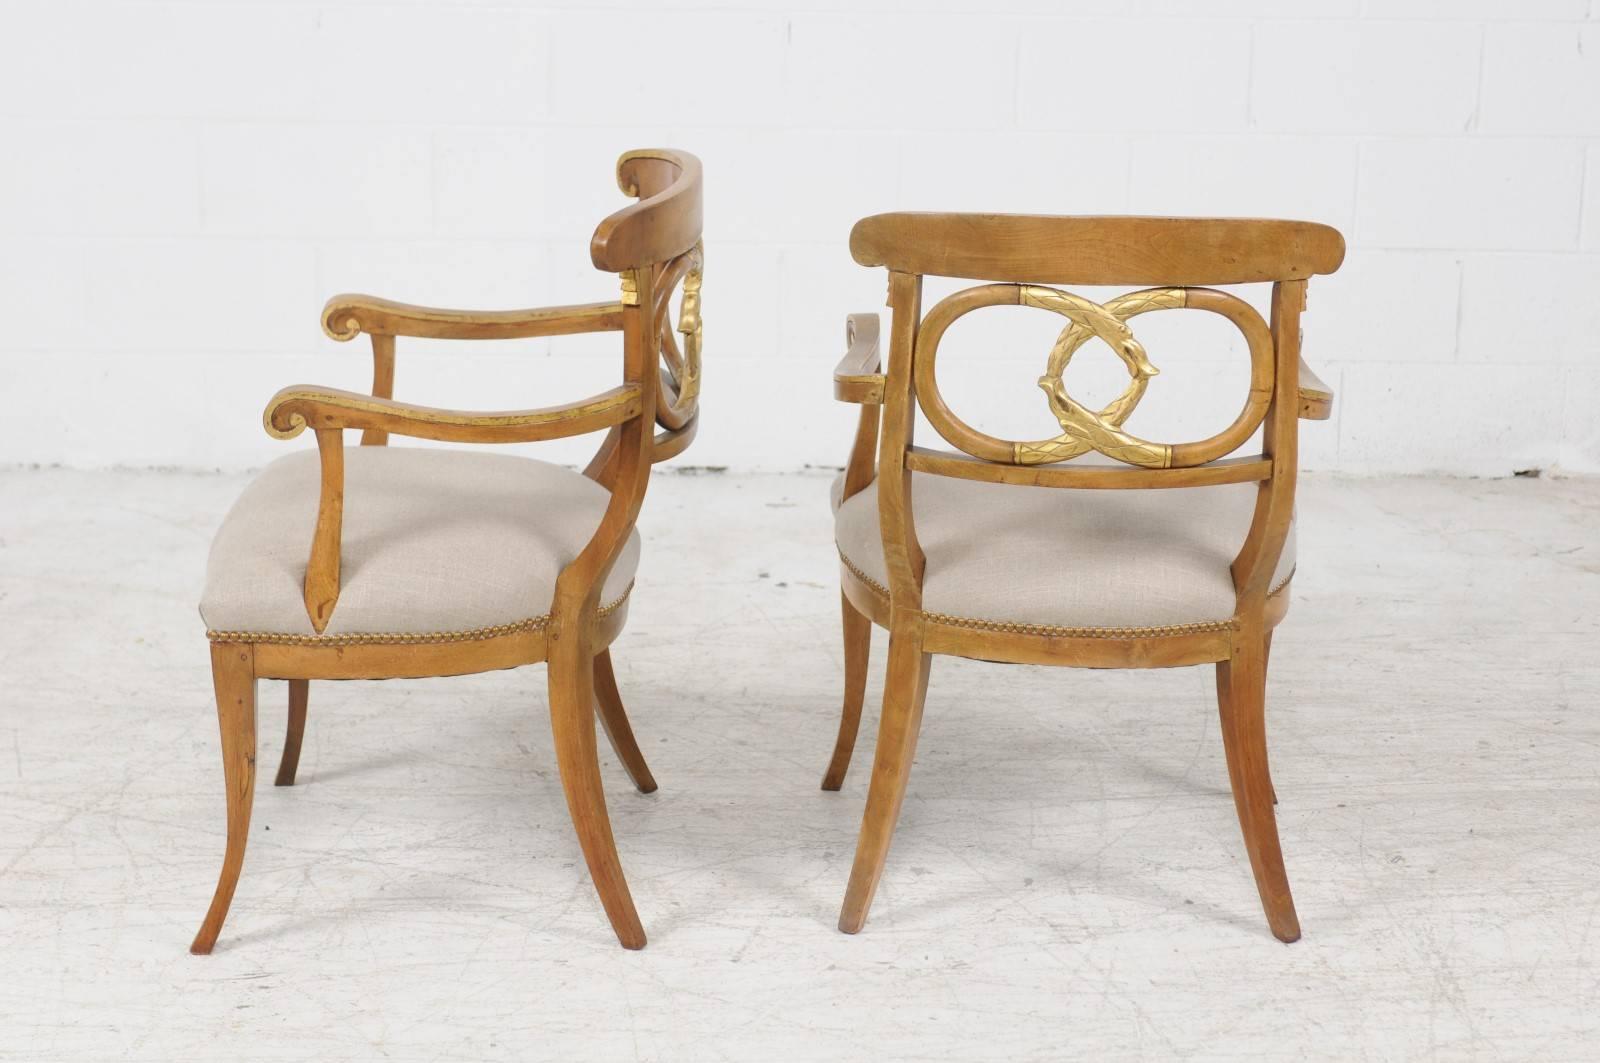 A pair of Italian parcel-gilt walnut armchairs with intertwined serpents and saber legs from the mid 19th century and new upholstery. Each of this pair of Italian chairs features a curved back with gilded accent on the upper rail. The eye is